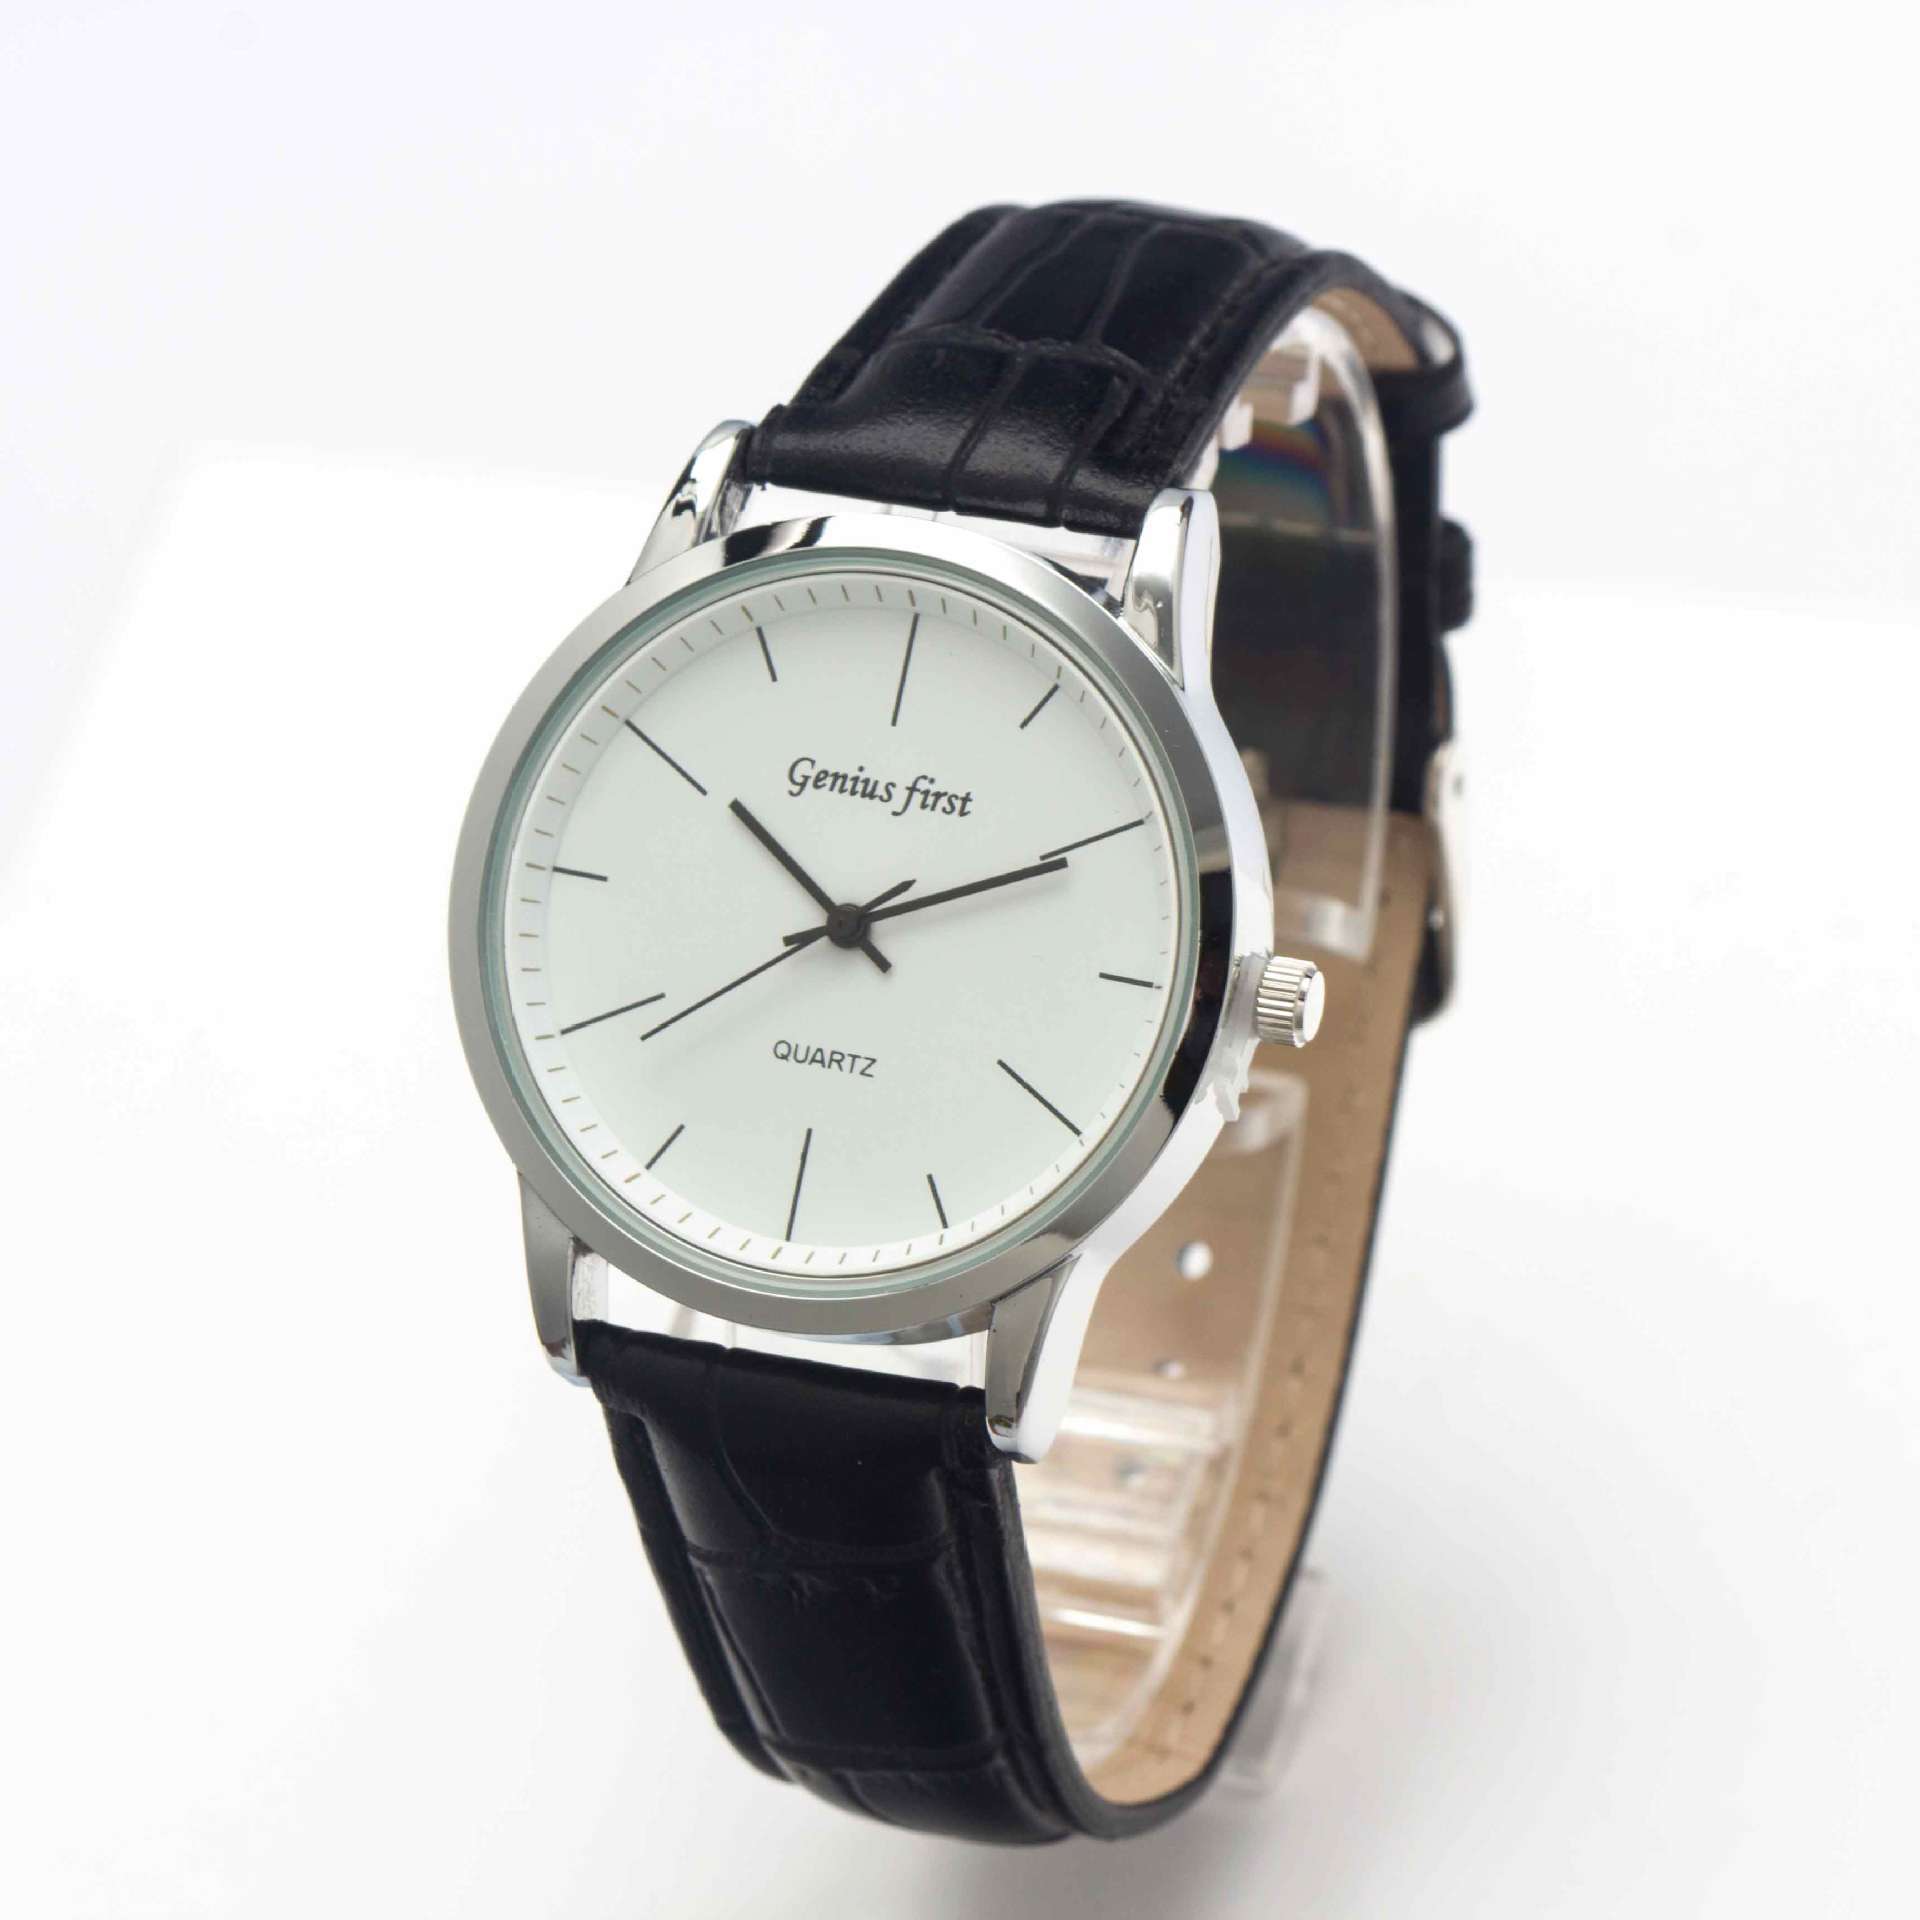 Men's Business Watch with a simple stylish strap